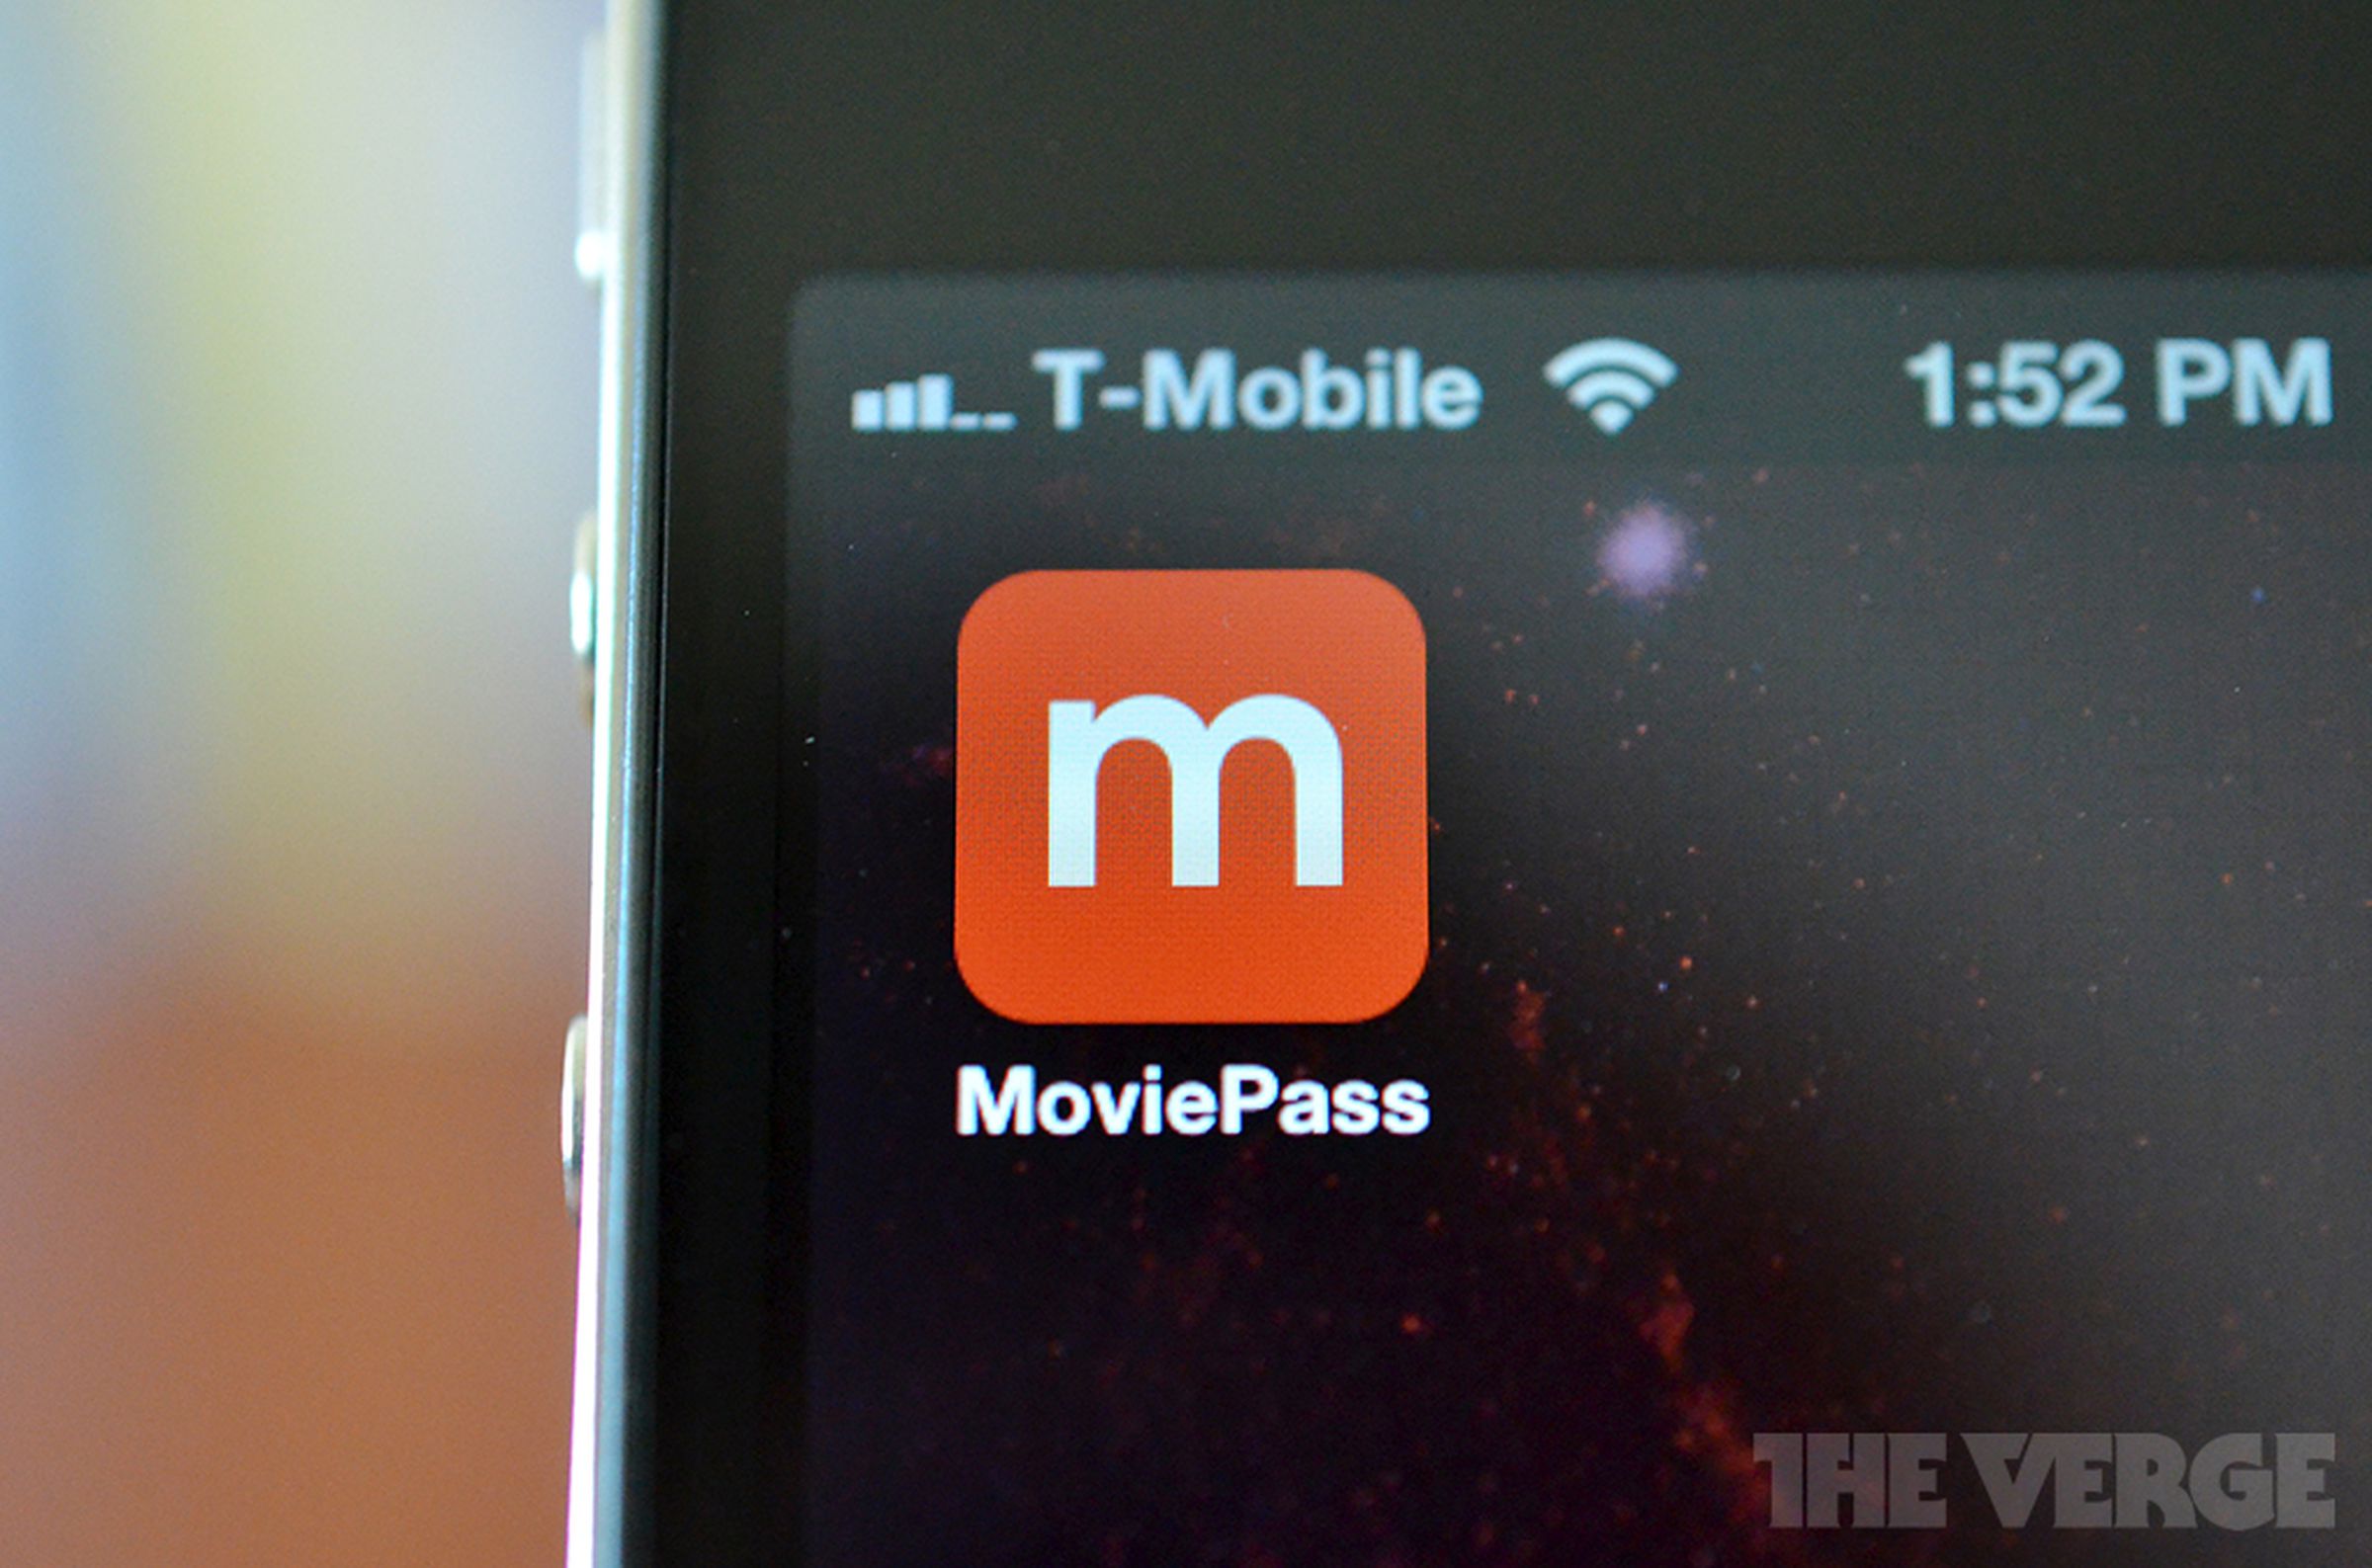 MoviePass hands-on images